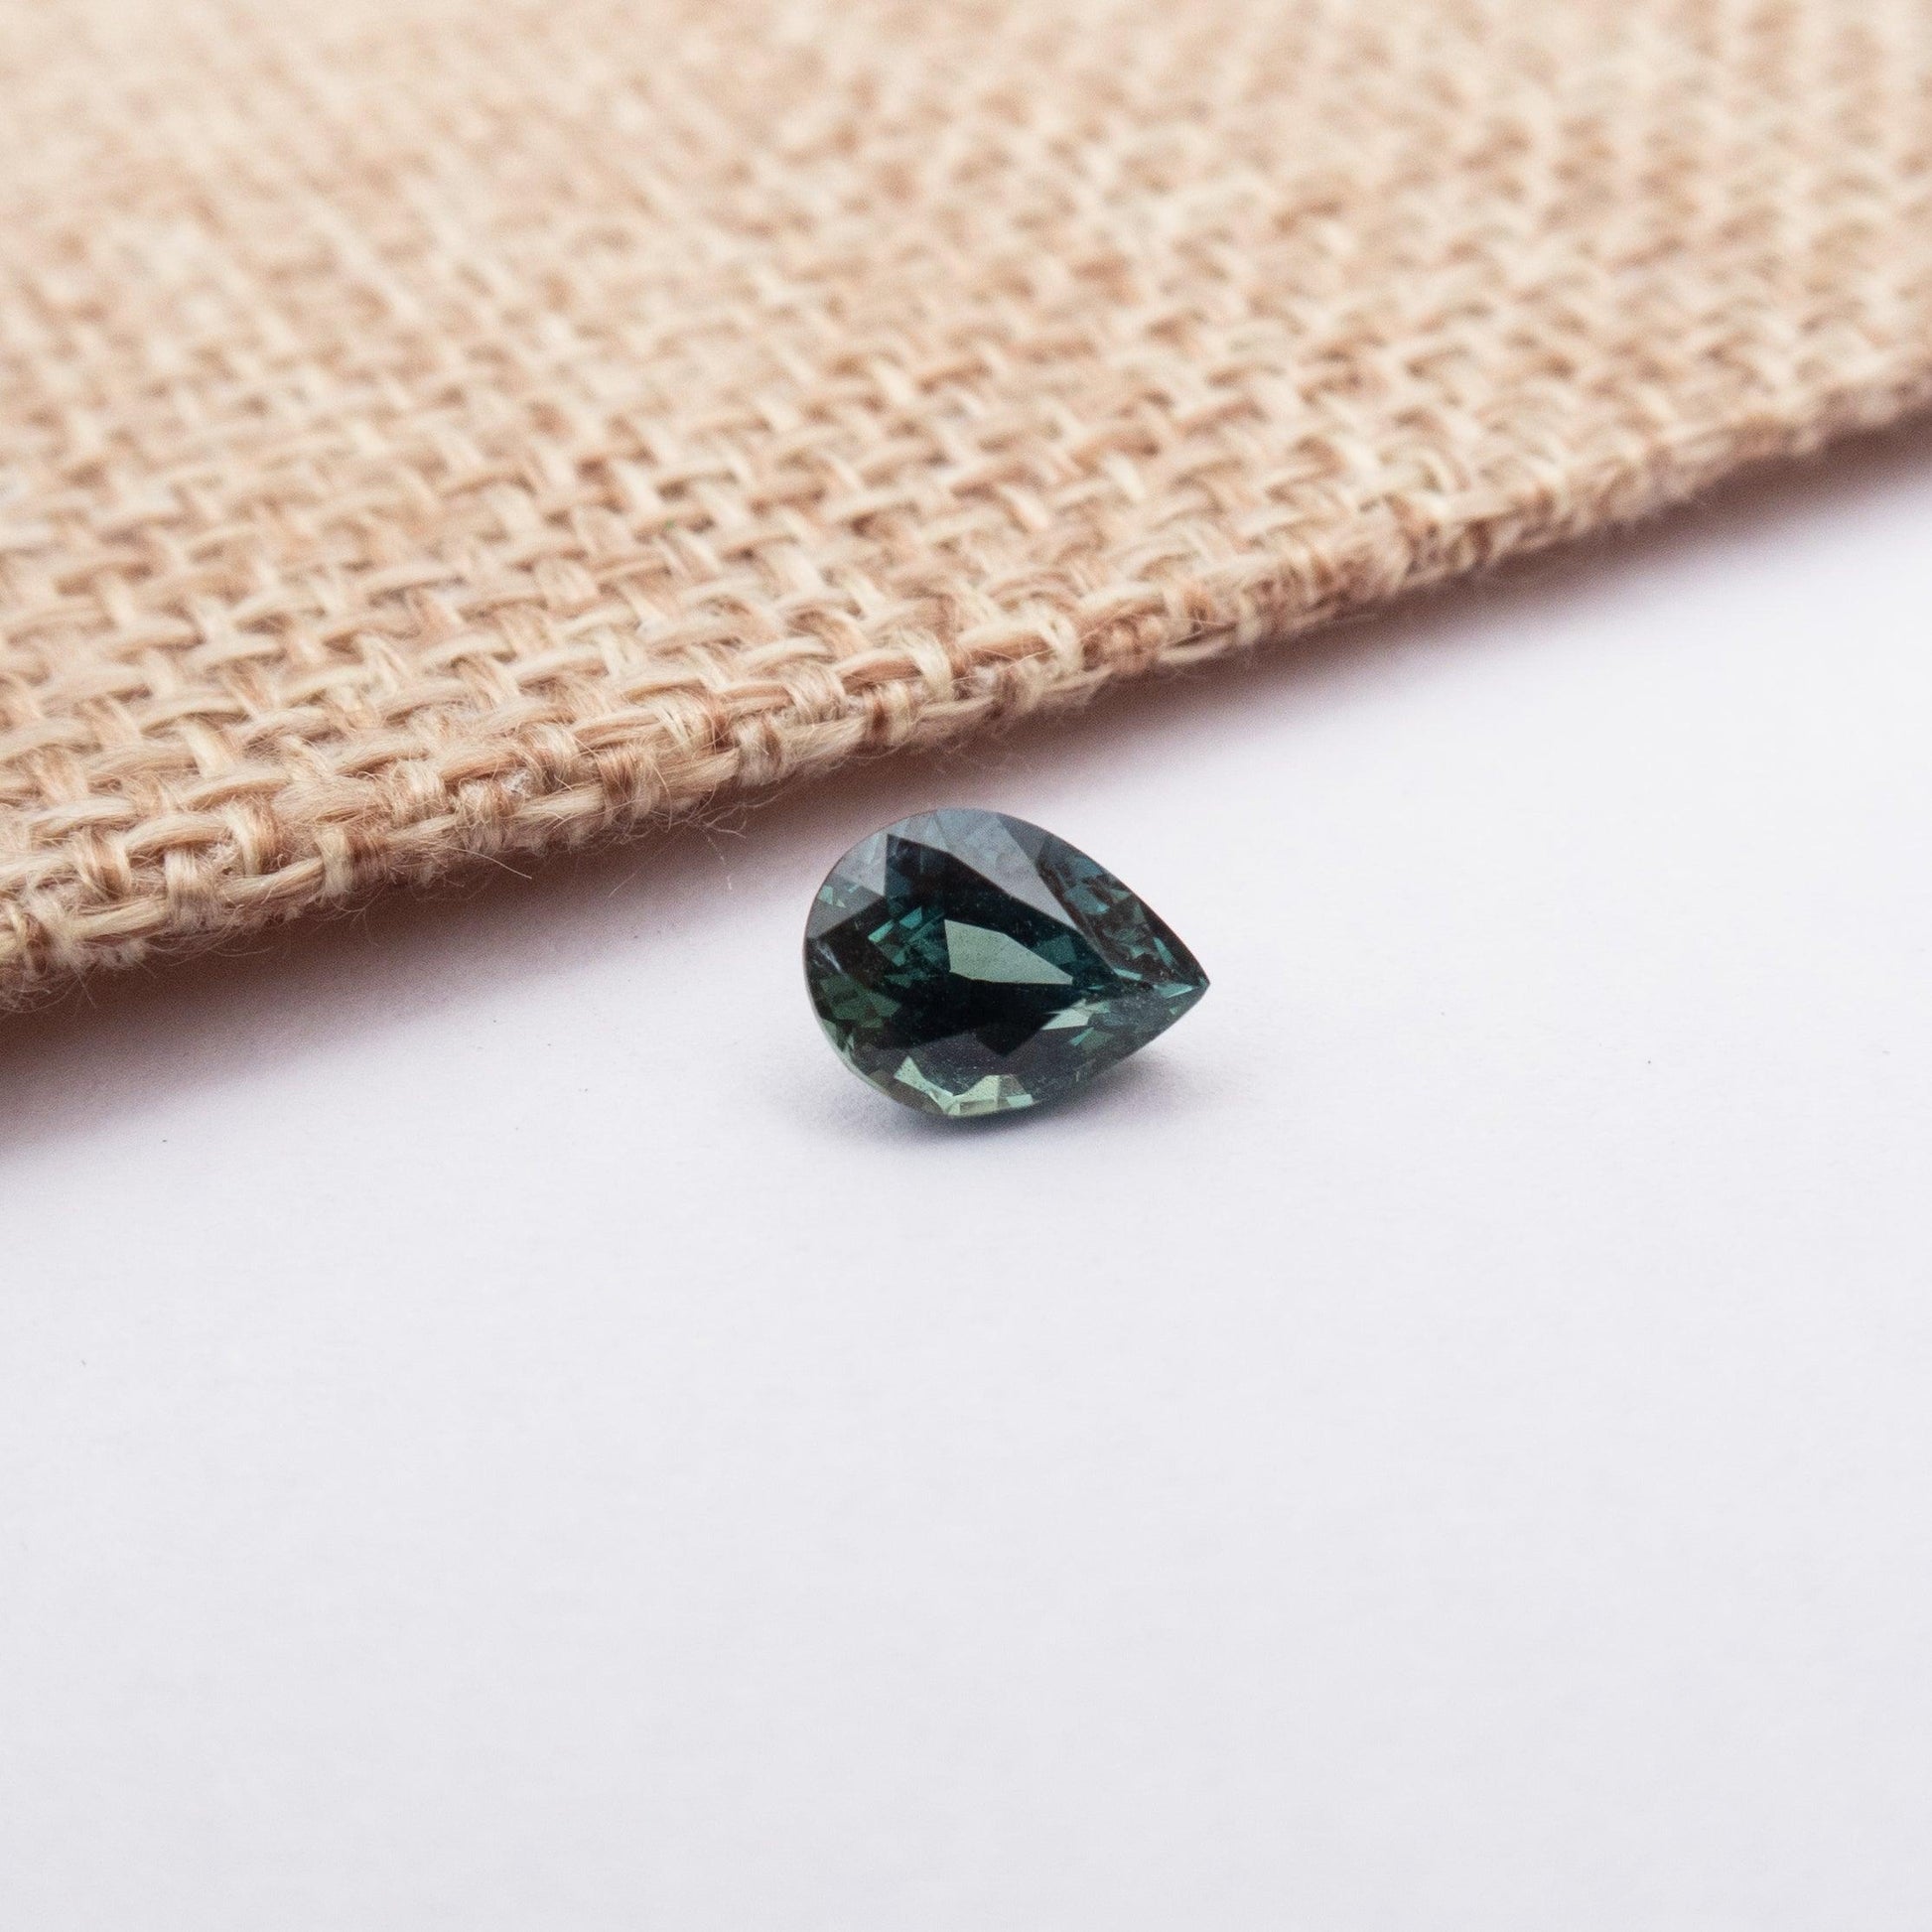 Teal Sapphire Natural No Heat 1.17ct